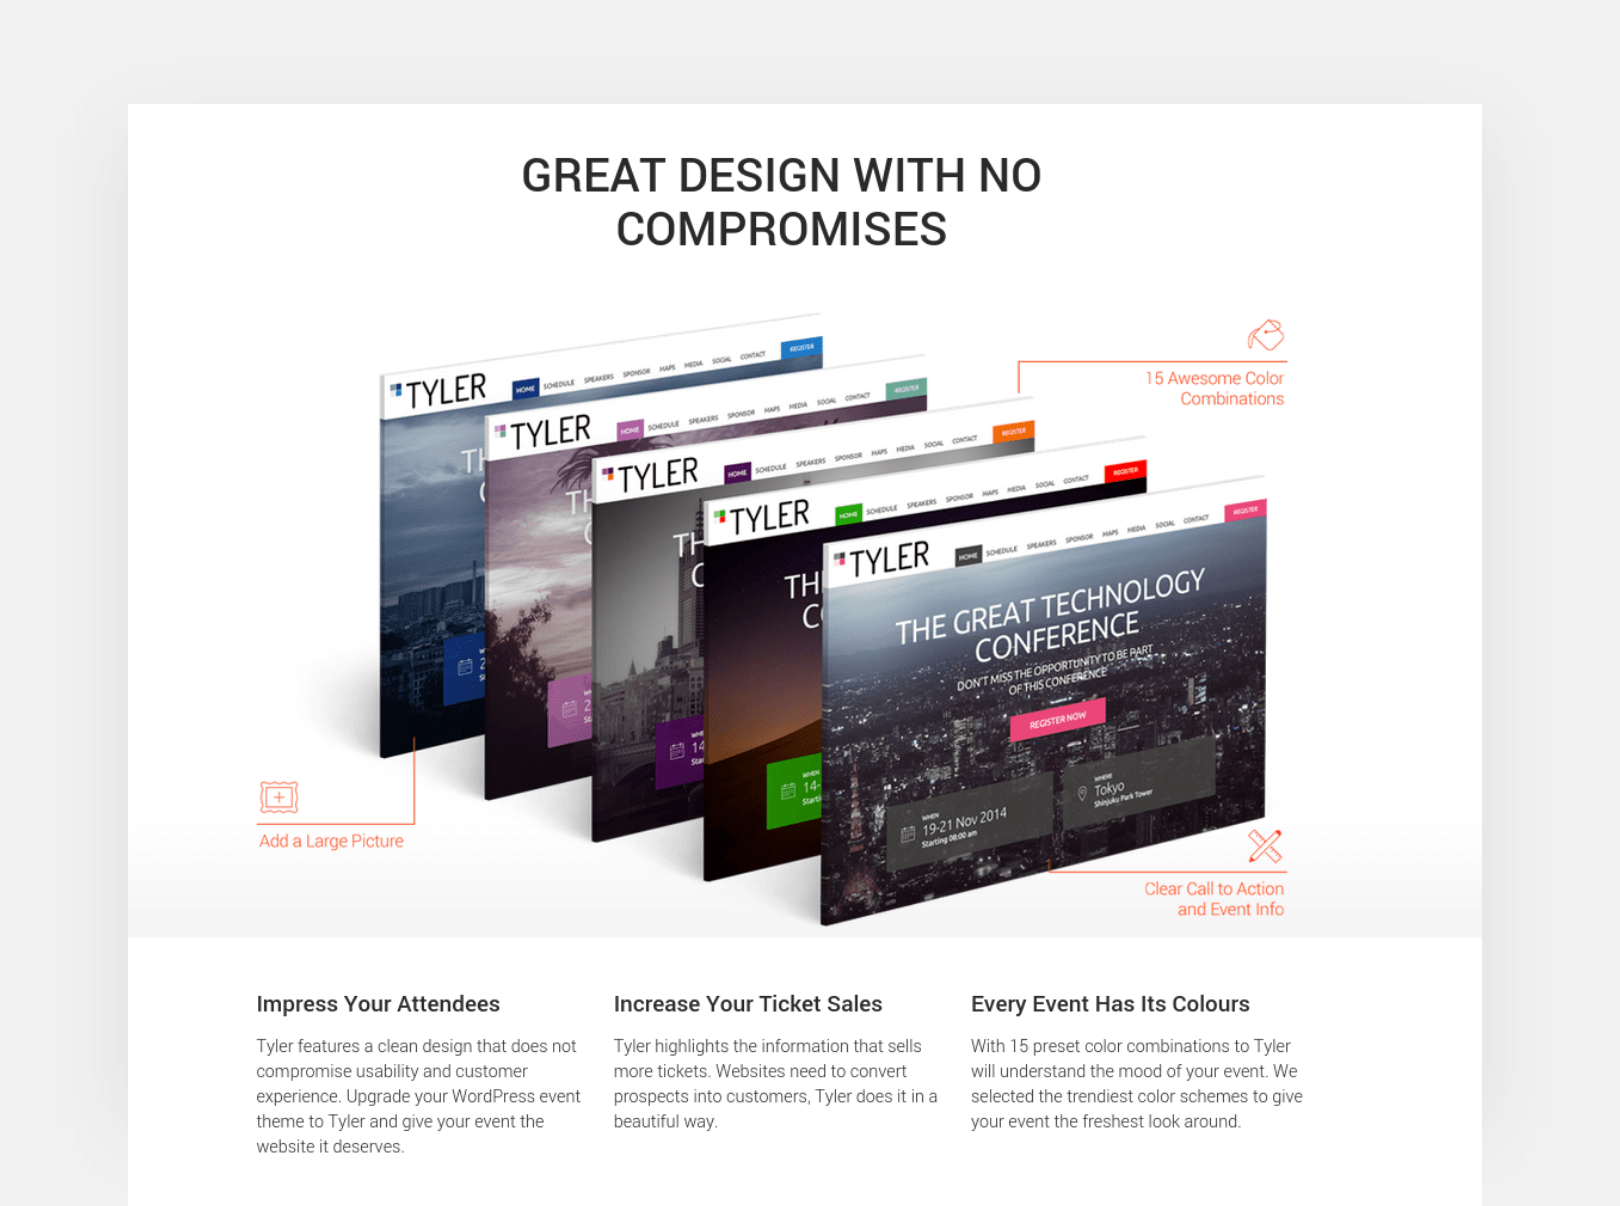 Tyler - great design with no compromises